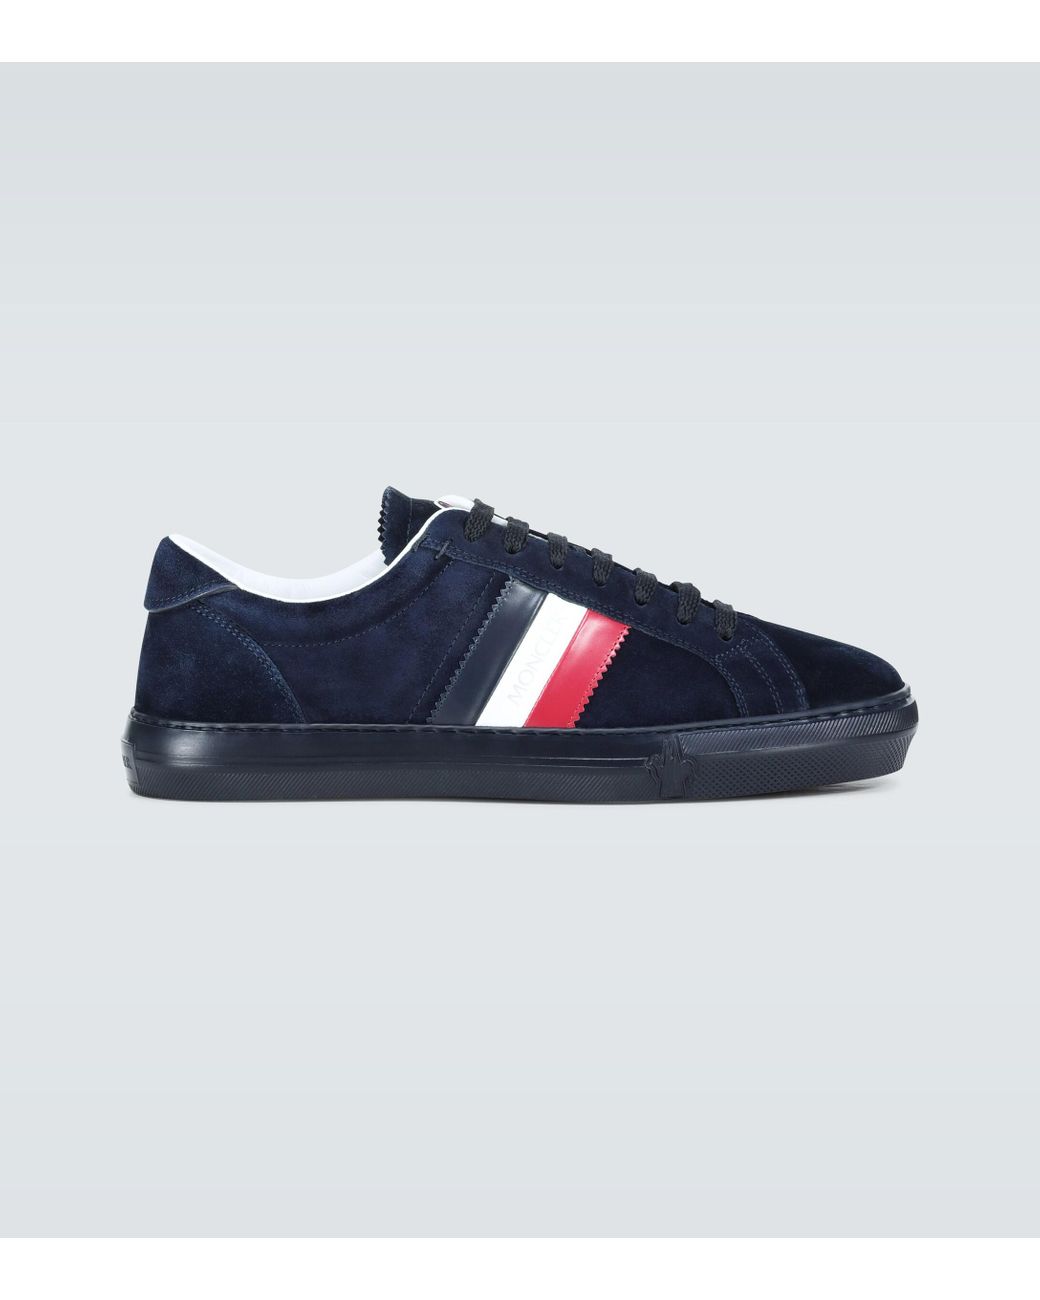 Moncler New Monaco Suede Sneakers in Blue for Men - Lyst